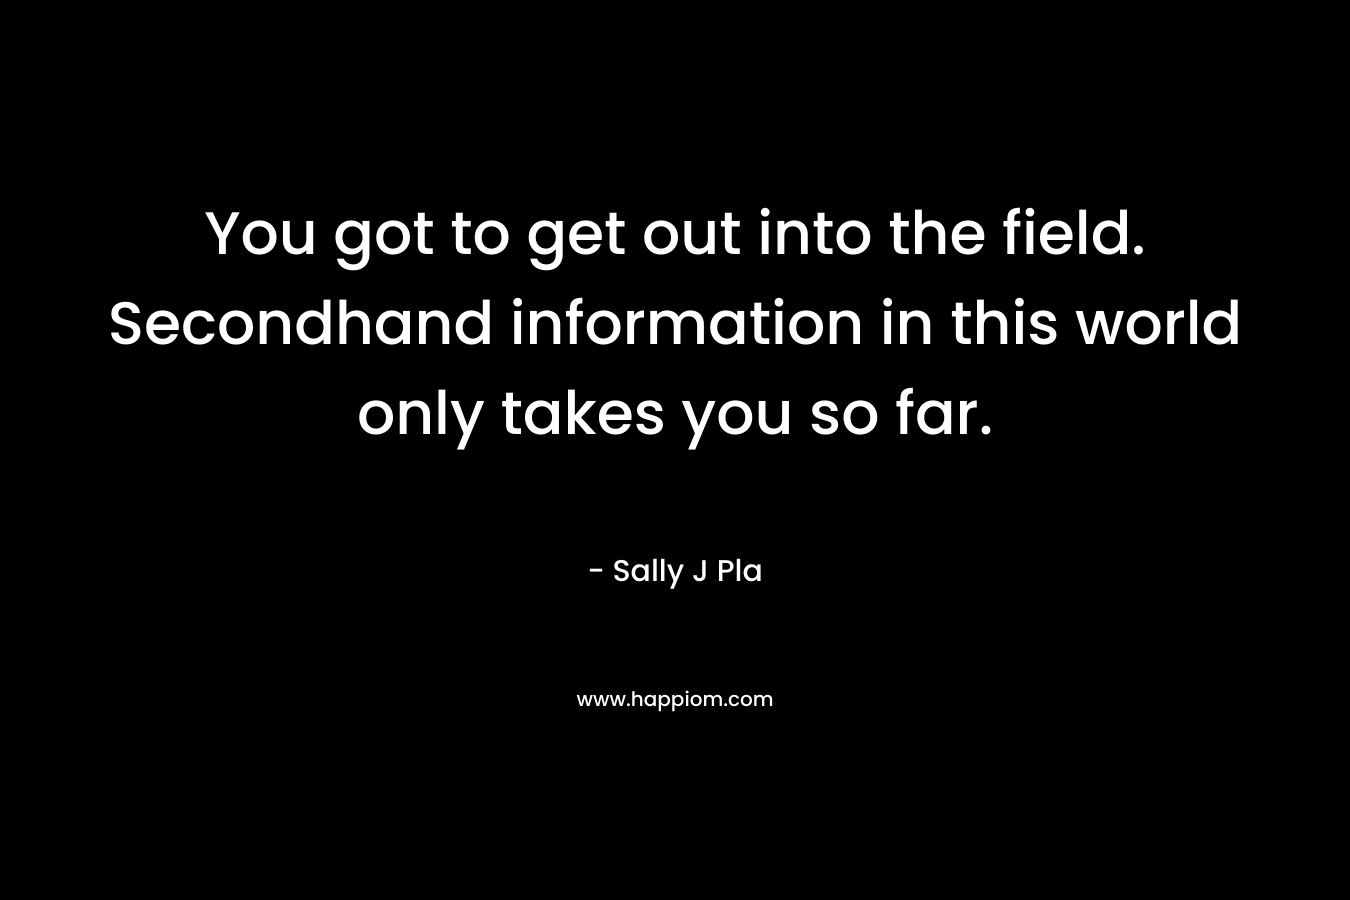 You got to get out into the field. Secondhand information in this world only takes you so far. – Sally J Pla